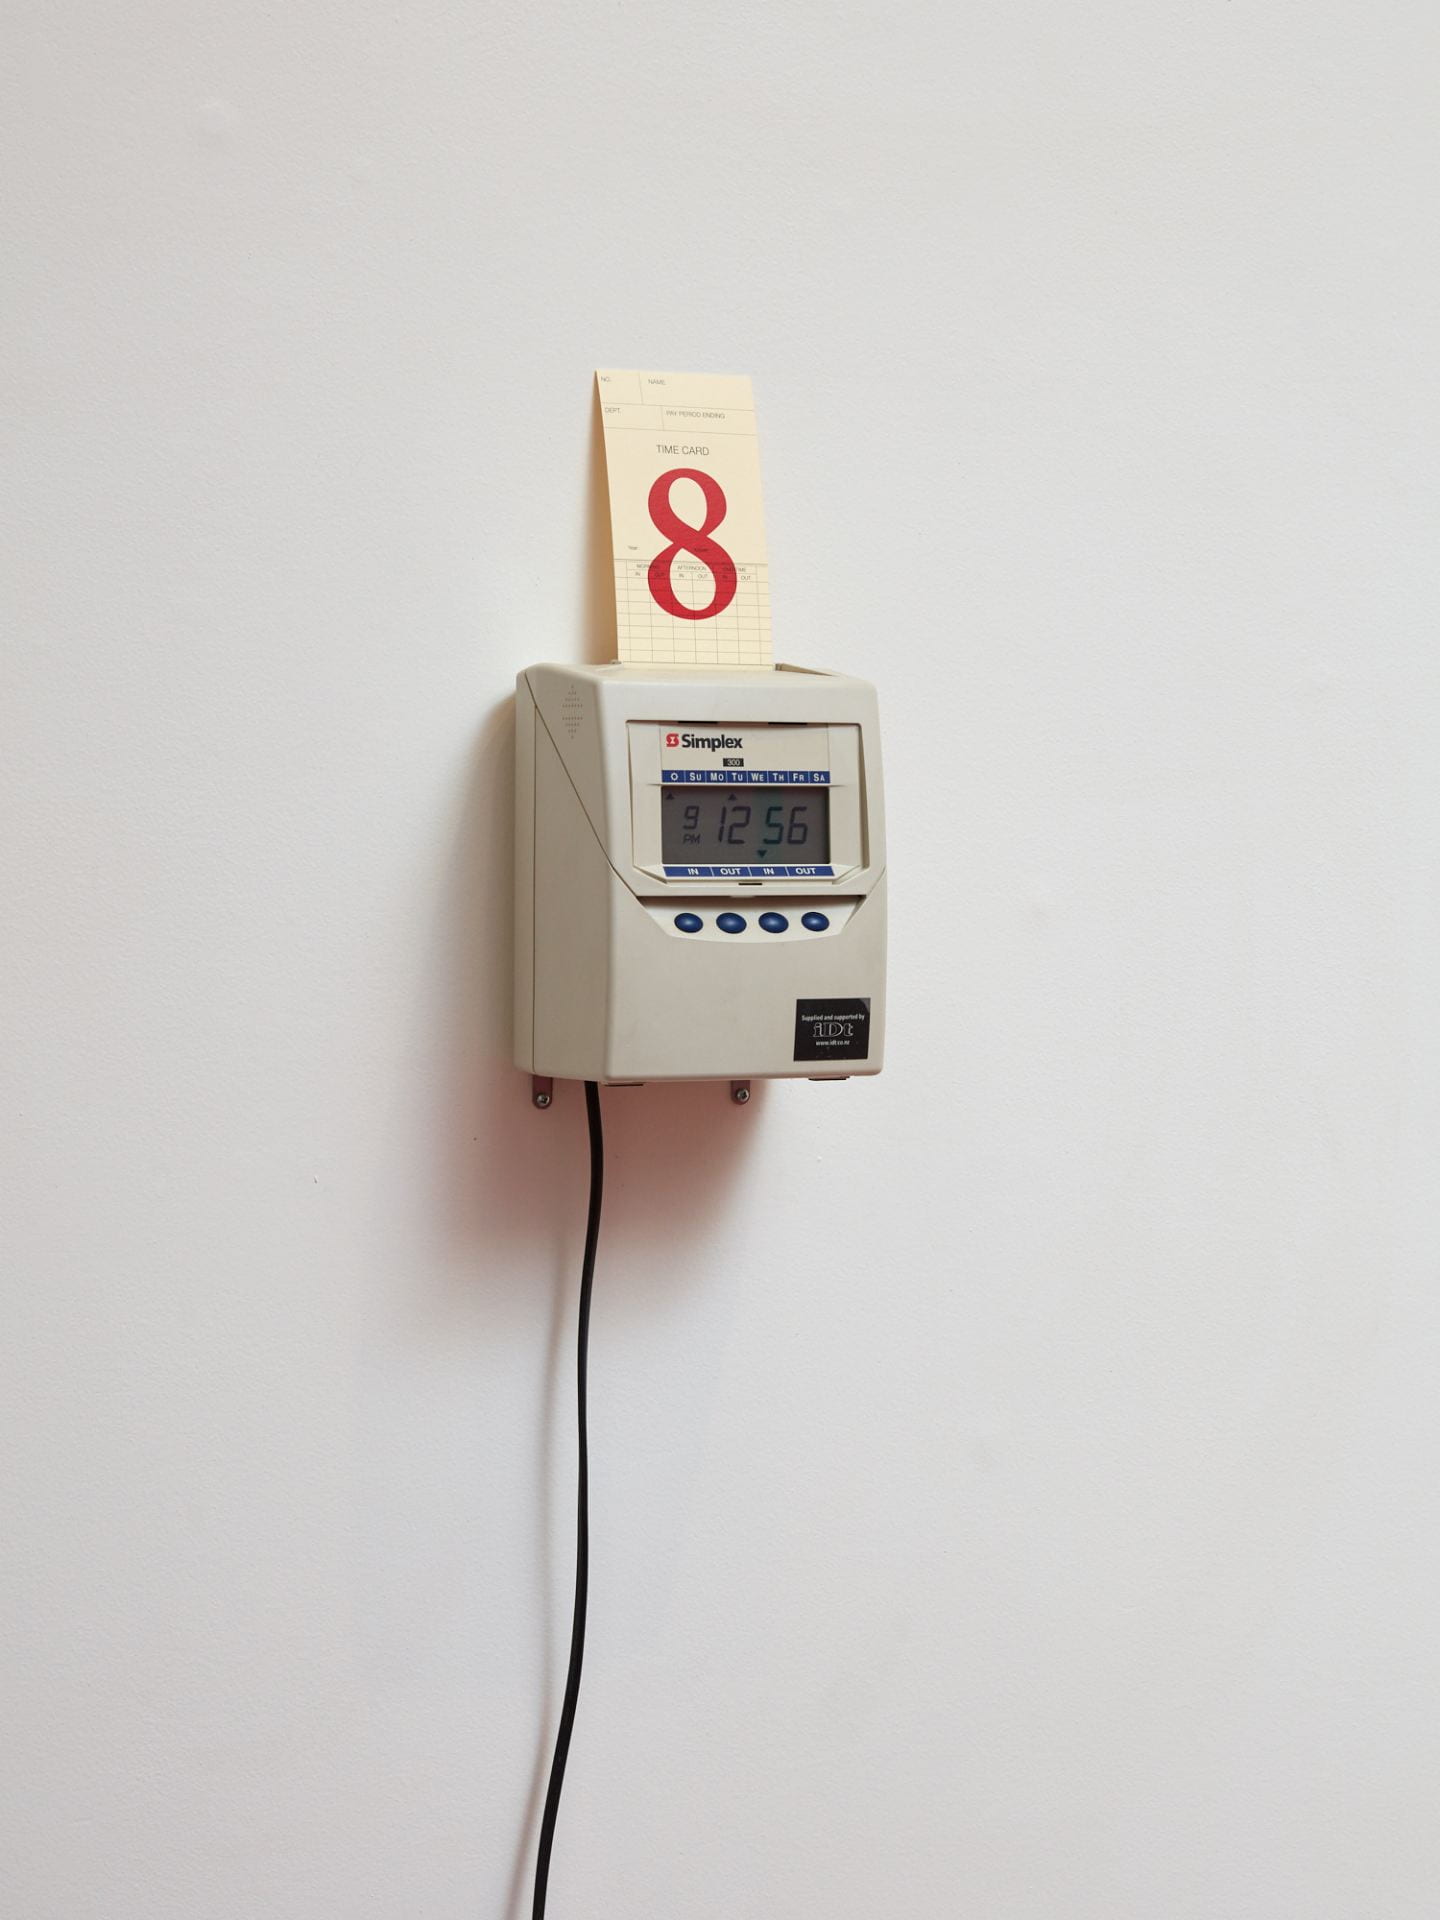 An old-fashioned employee timeclock mounted on a gallery wall. A timecard rests in the slot on top, with a red '8' stamped on it.